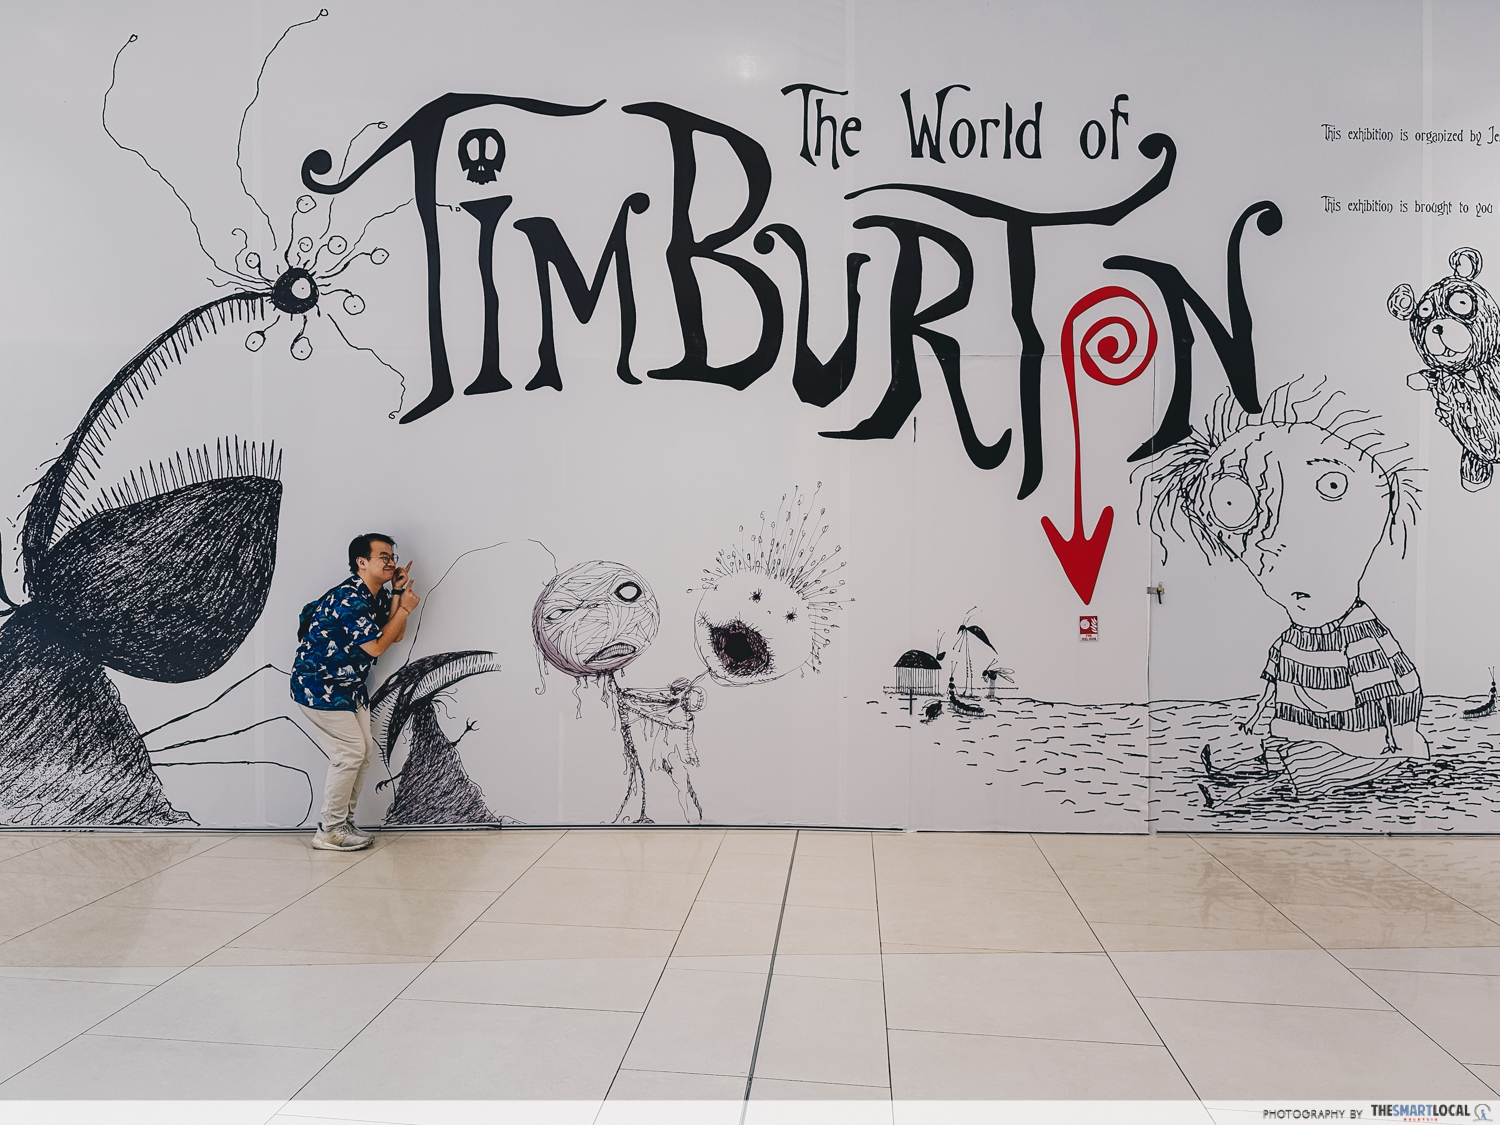 Of Tim Burton Exhibition Opens July In KL With 500+ Works